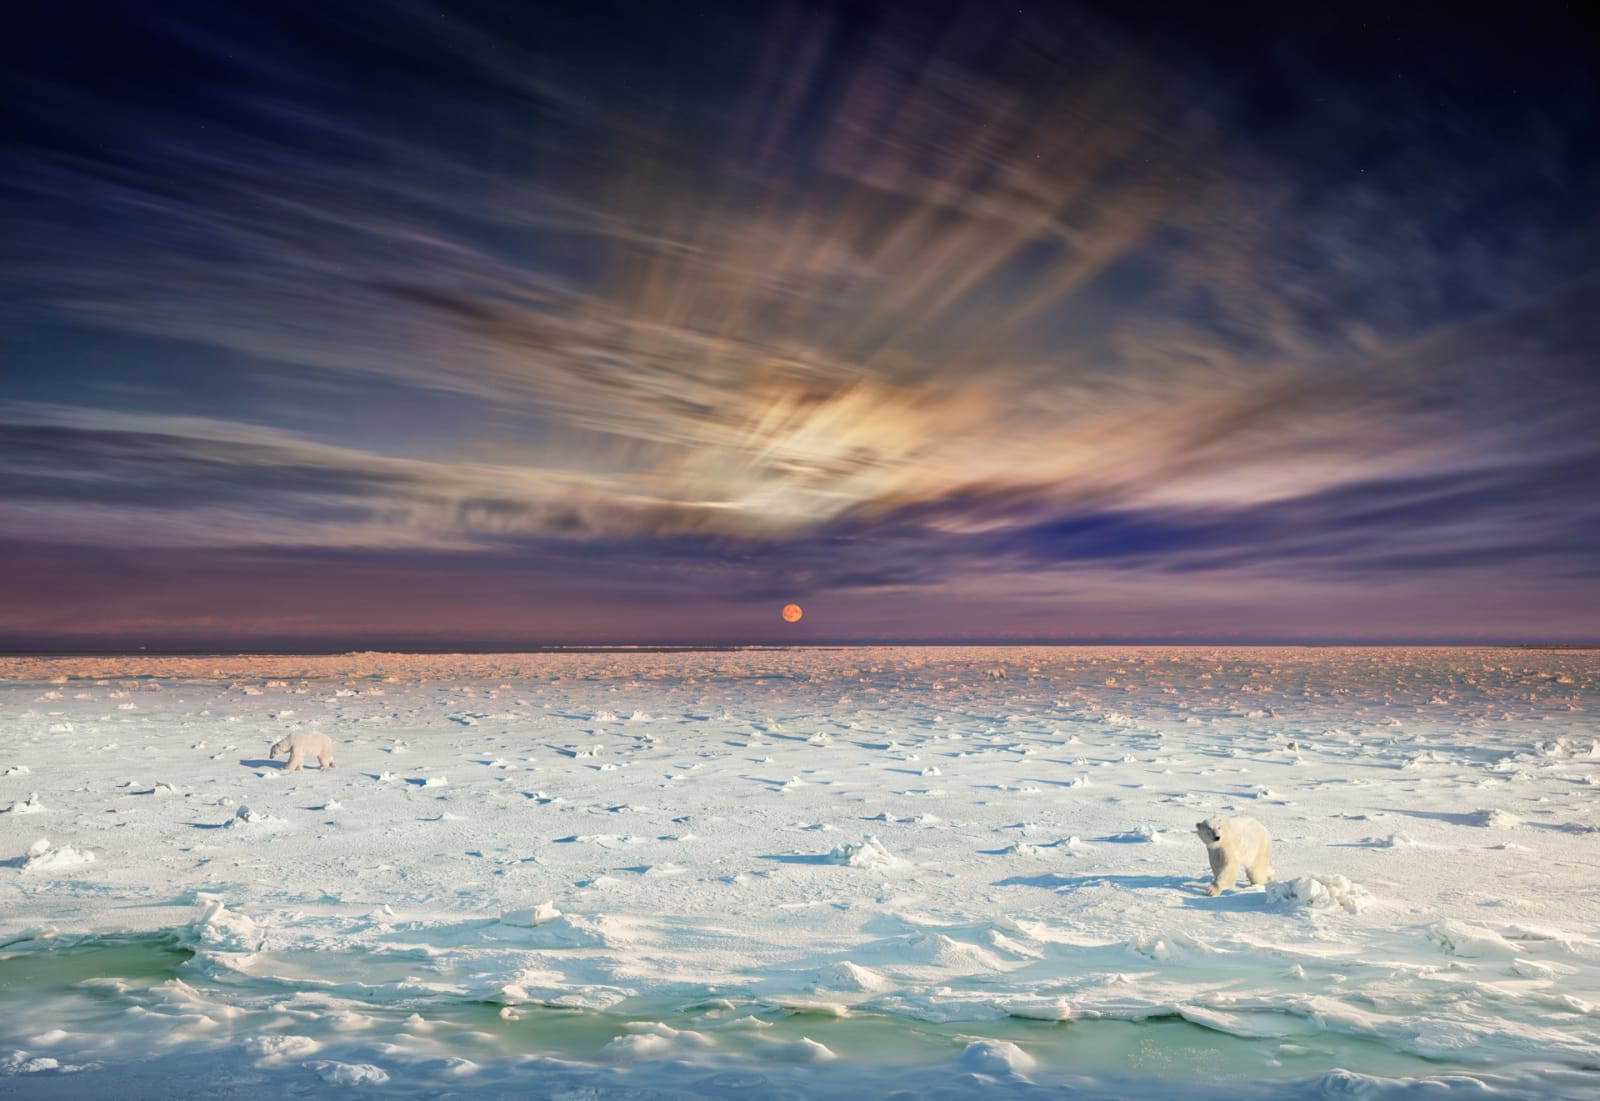 Stephen Wilkes Polar Bear, Churchill, Manitoba, Day to Night, 2019 Signed on label verso 24 x 35 inch archival pigment print Edition of 20 32 x 46 3/4 inch archival pigment print Edition of 15 48 x 70 inch archival pigment print Edition of 12 60 x 87 inch archival pigment print Edition of 4